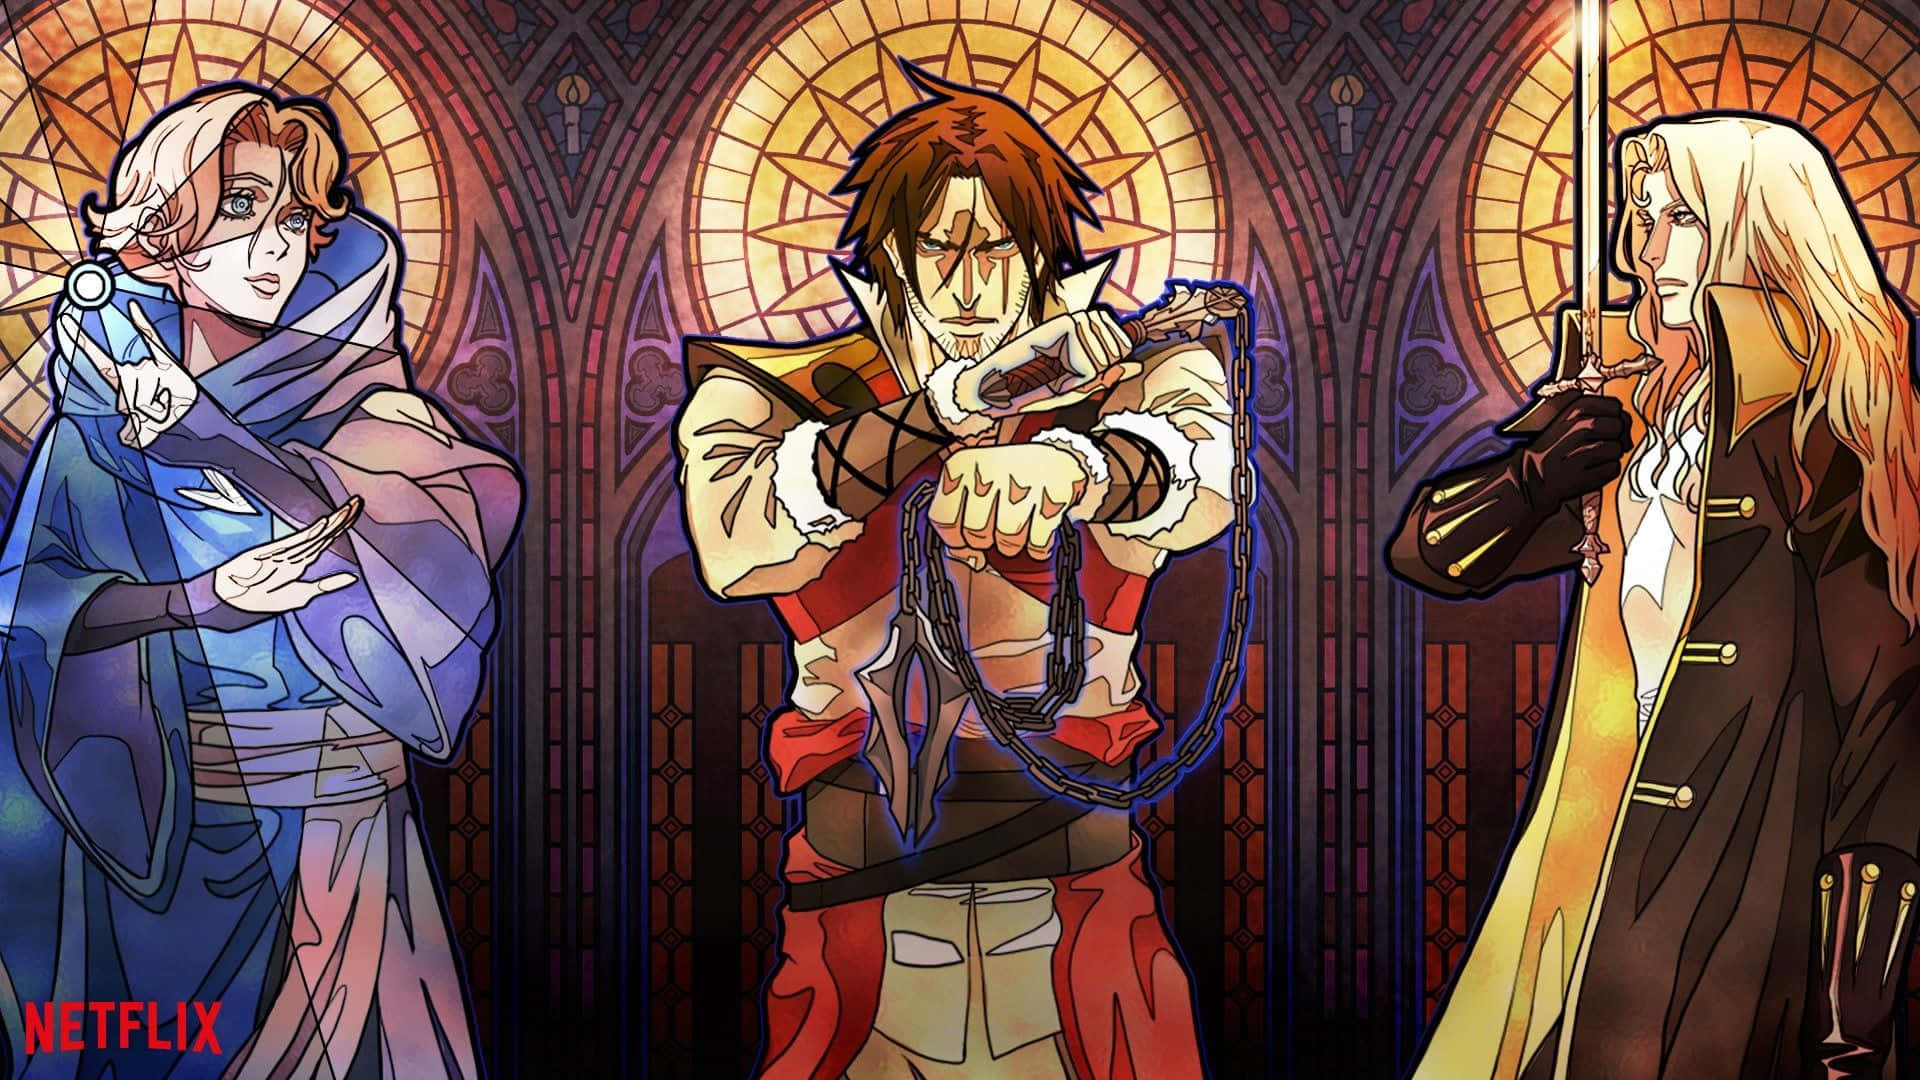 Download Caption Castlevania Sypha Belnades In Magical Action Wallpaper